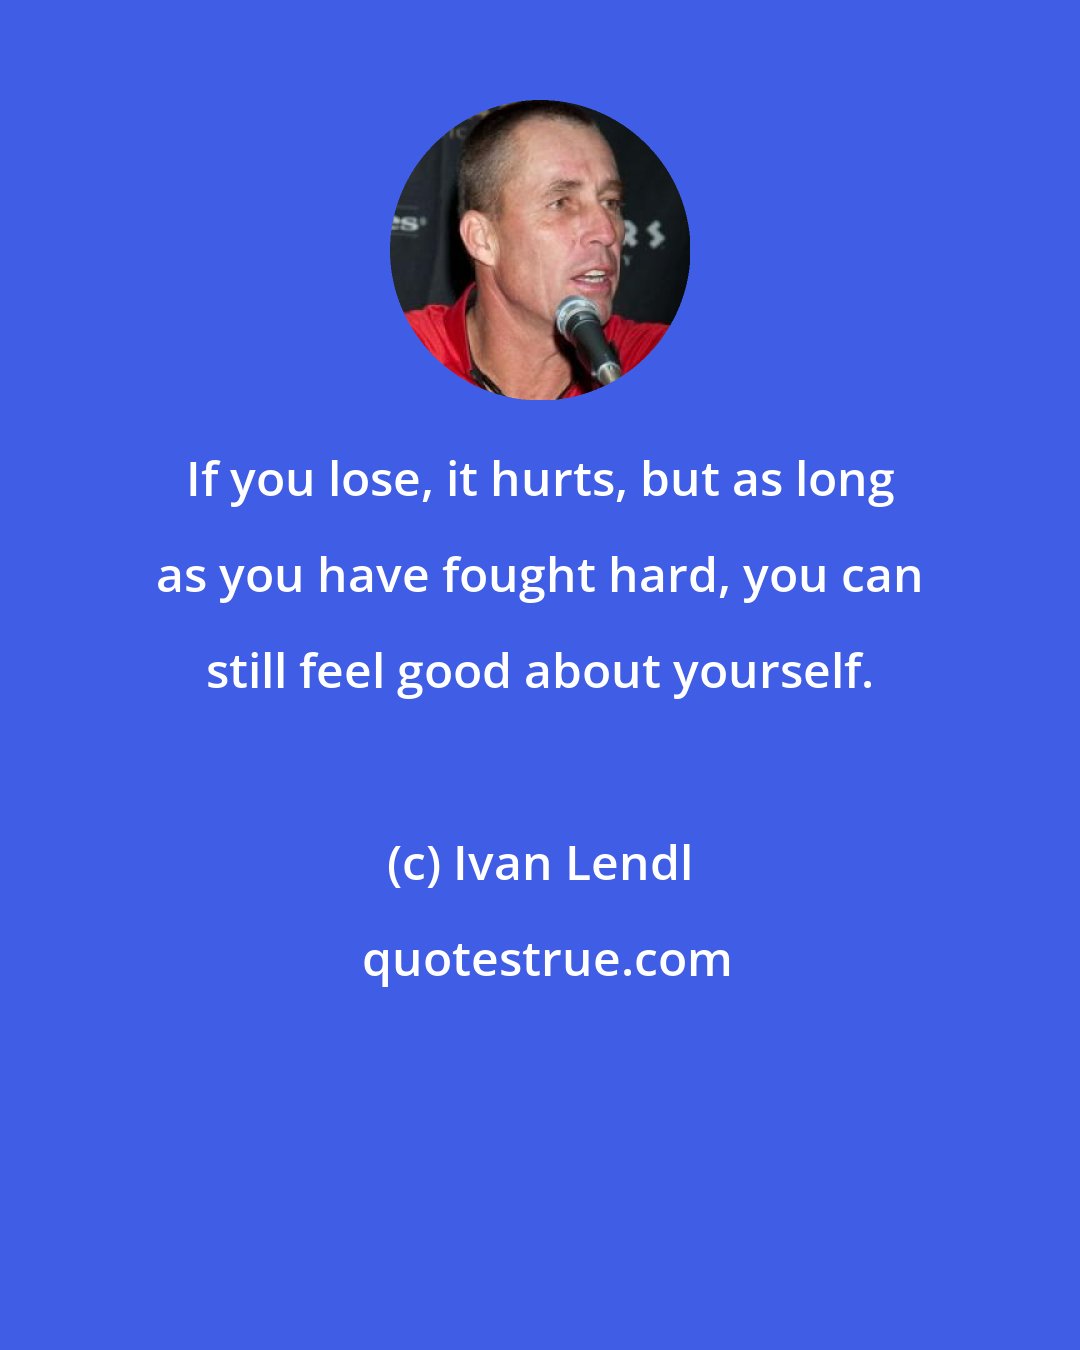 Ivan Lendl: If you lose, it hurts, but as long as you have fought hard, you can still feel good about yourself.